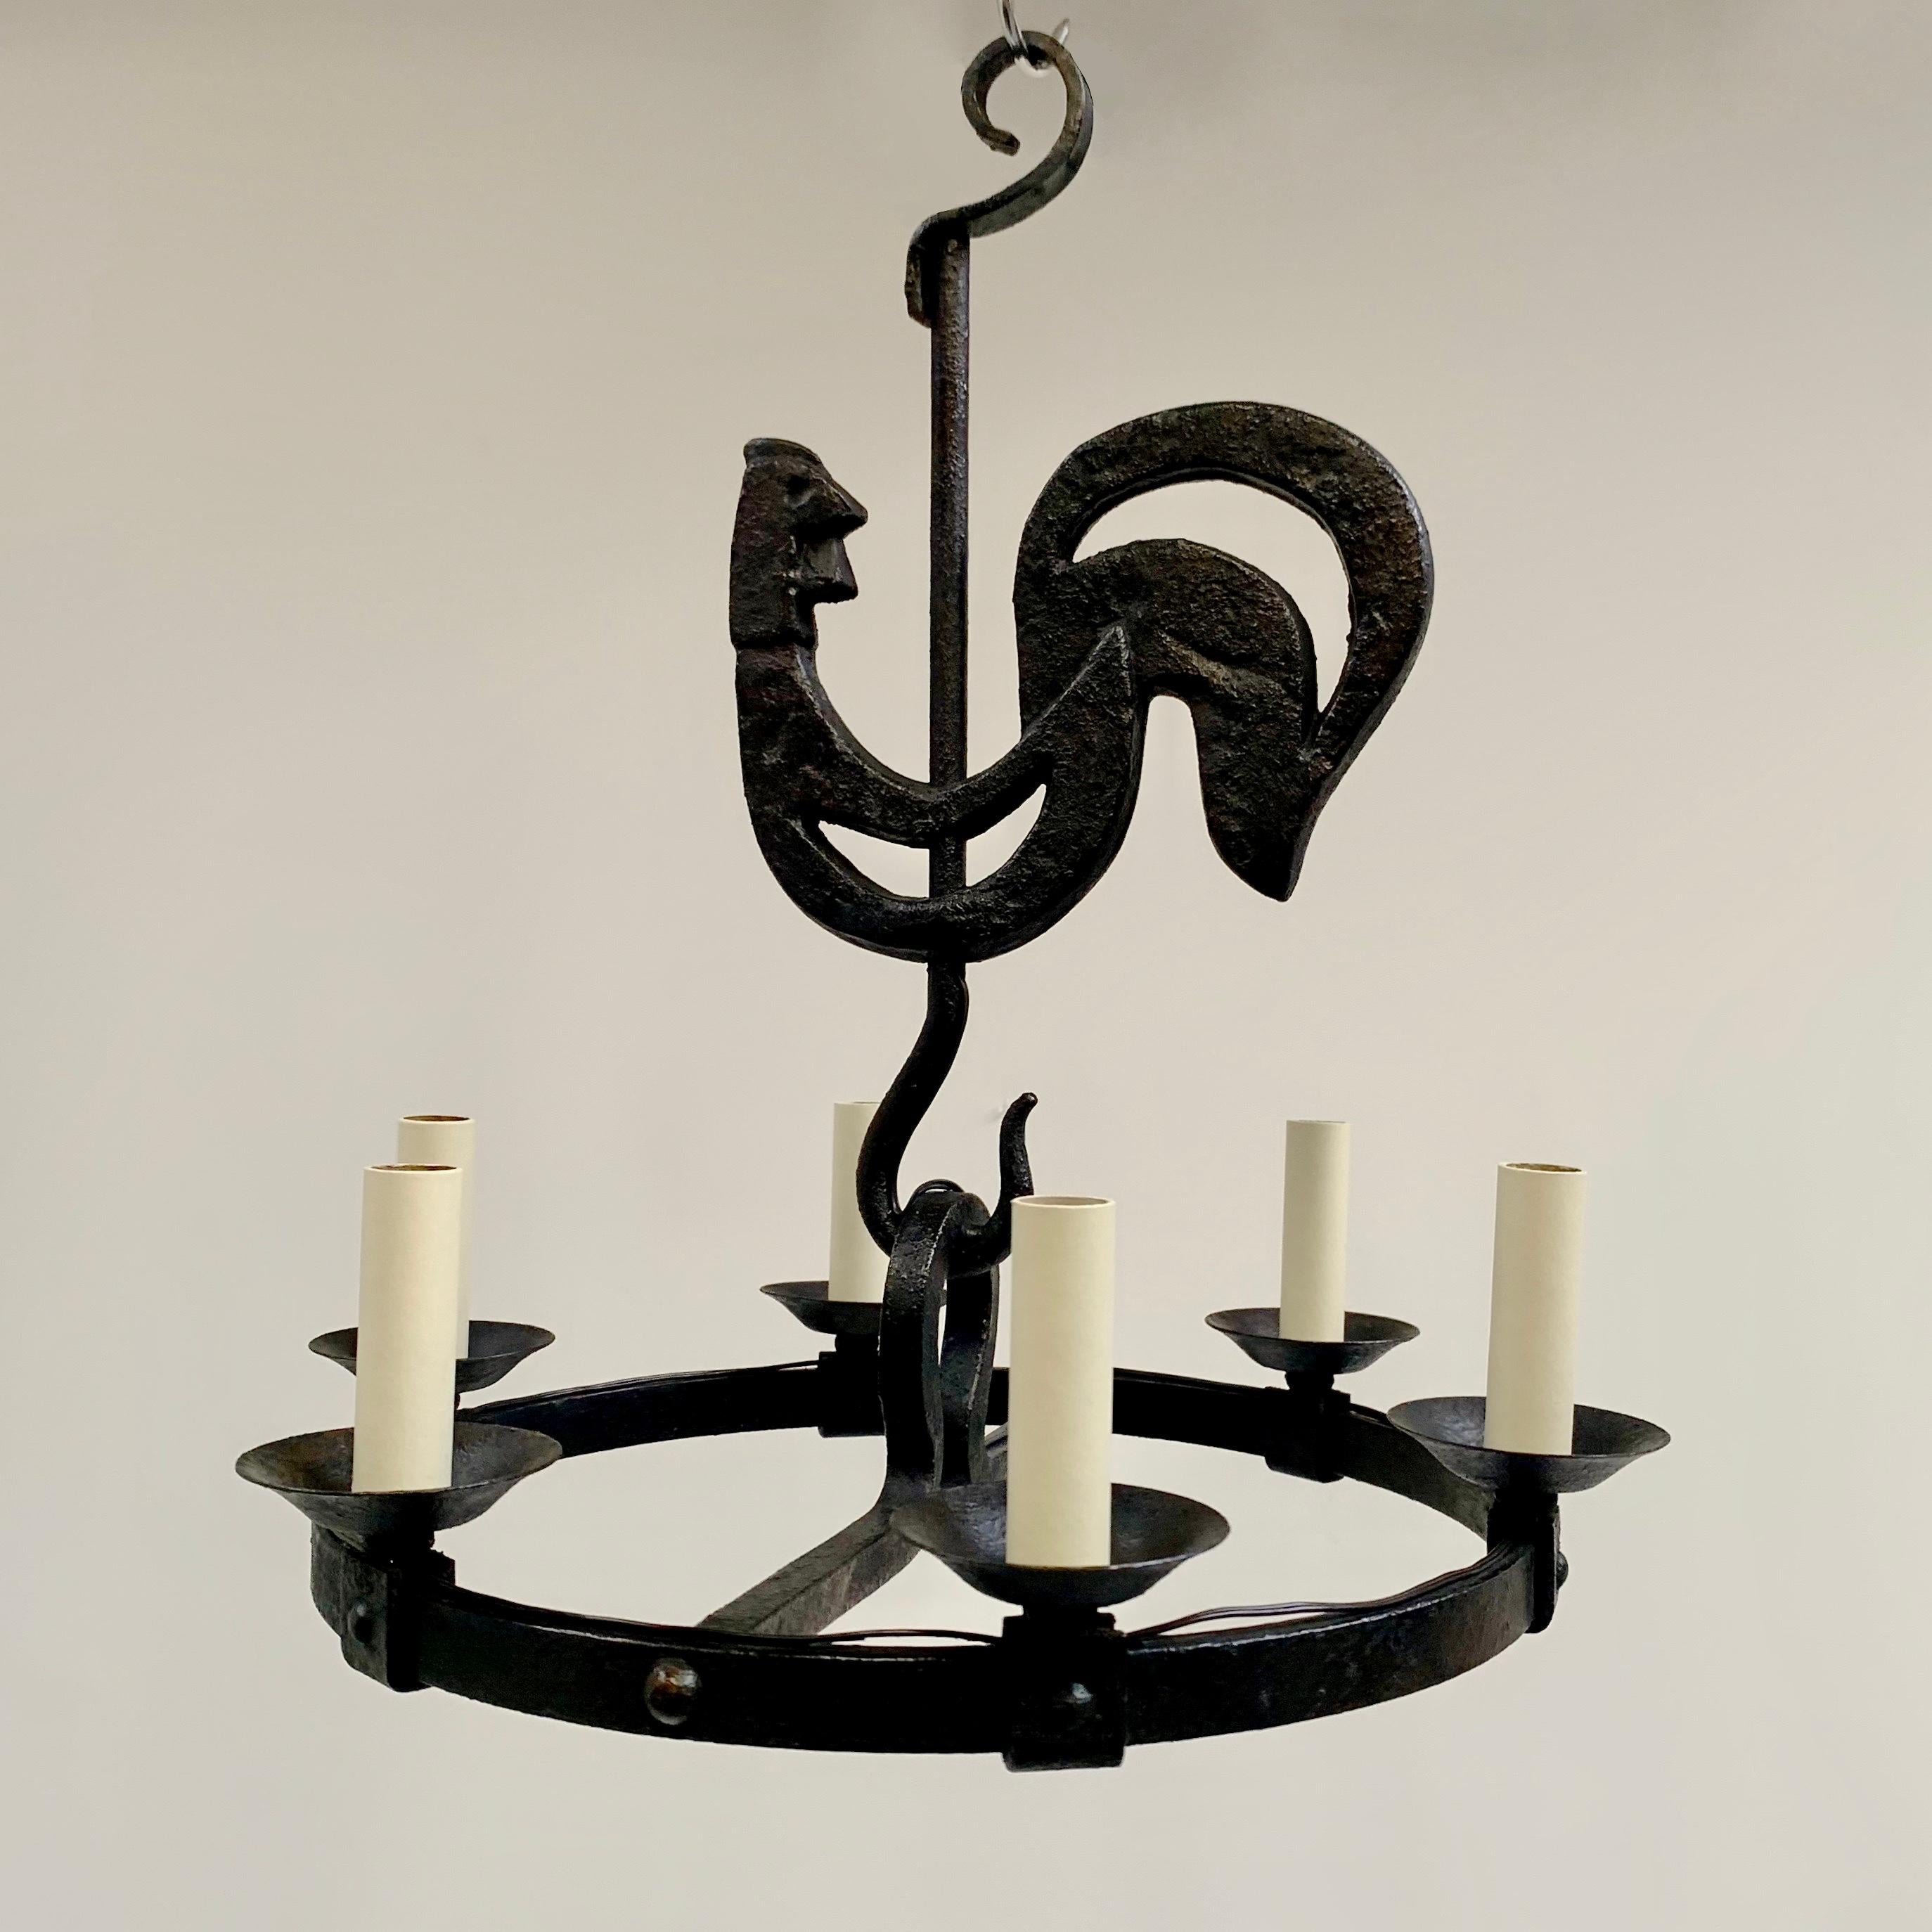 Nice Girouette chandelier,  Atelier Marolles manufacture attributed, France circa 1950.
Black wrought iron.
Rewired for 6 bulbs, ready for use.
Dimensions: 50 cm diameter, 54 cm H.
Very good original condition.
All purchases are covered by our Buyer